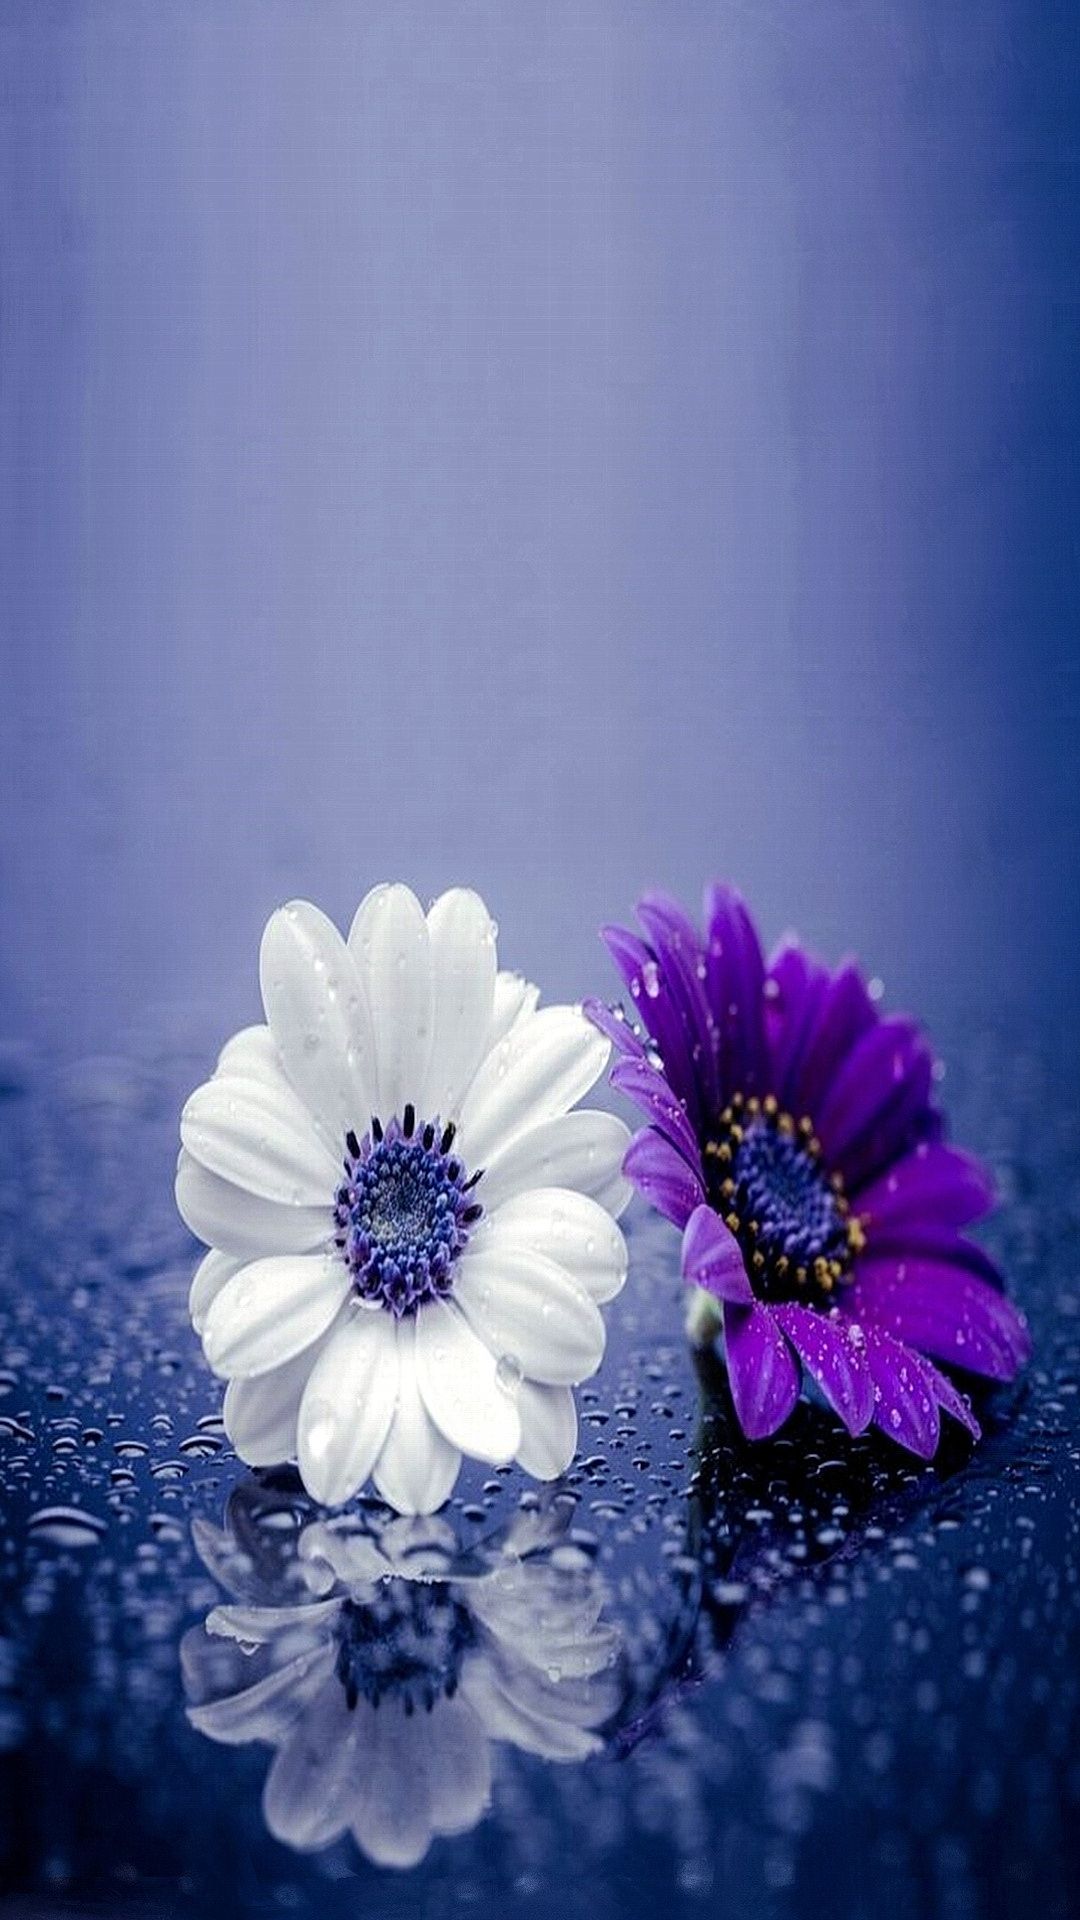 Nice flowers 1080 x 1920 Wallpaper available for free download